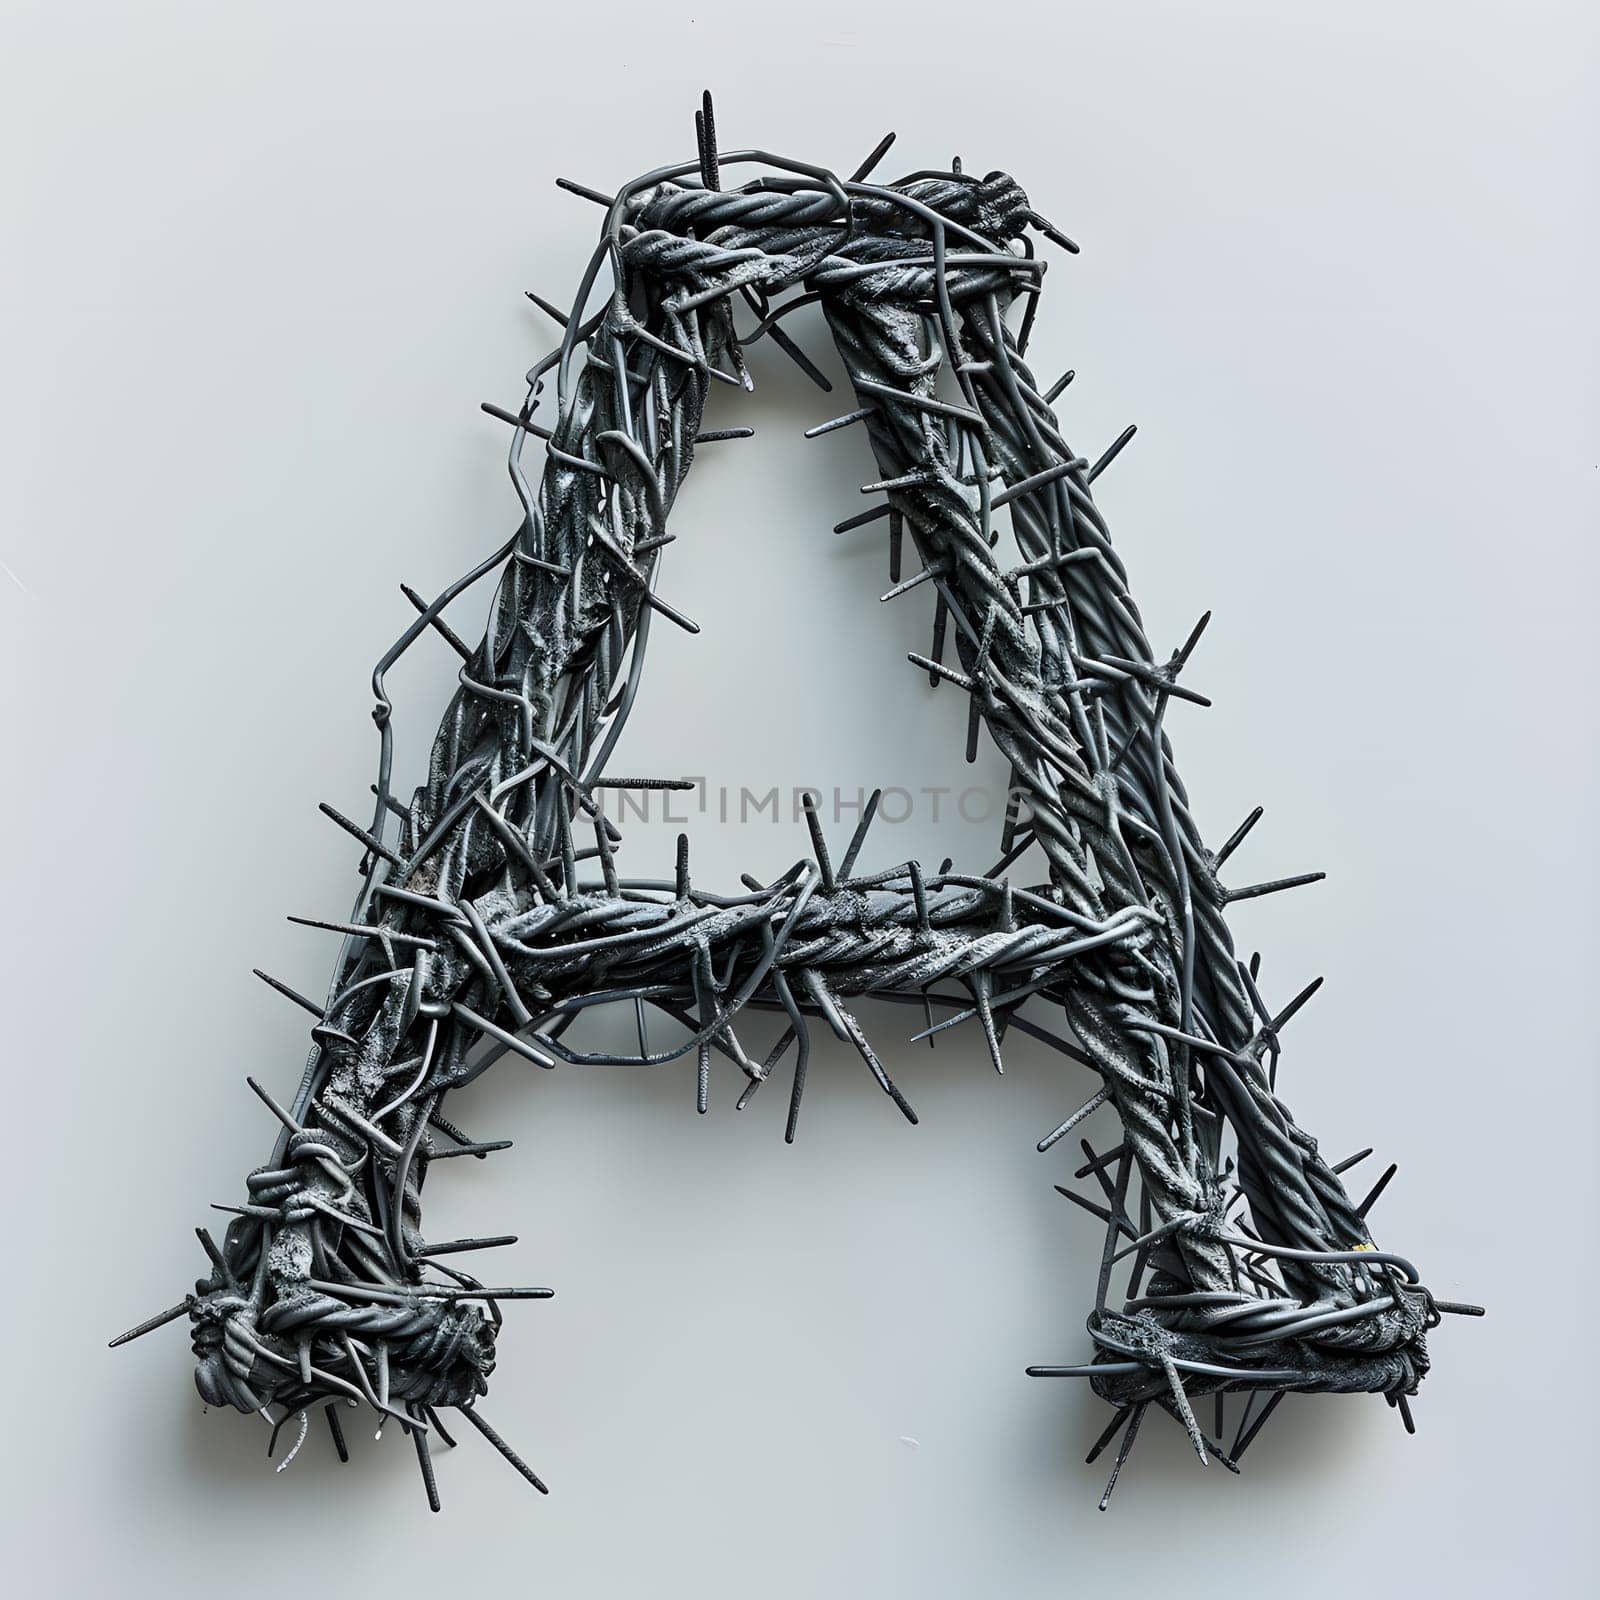 the letter a is made out of barbed wire by Nadtochiy